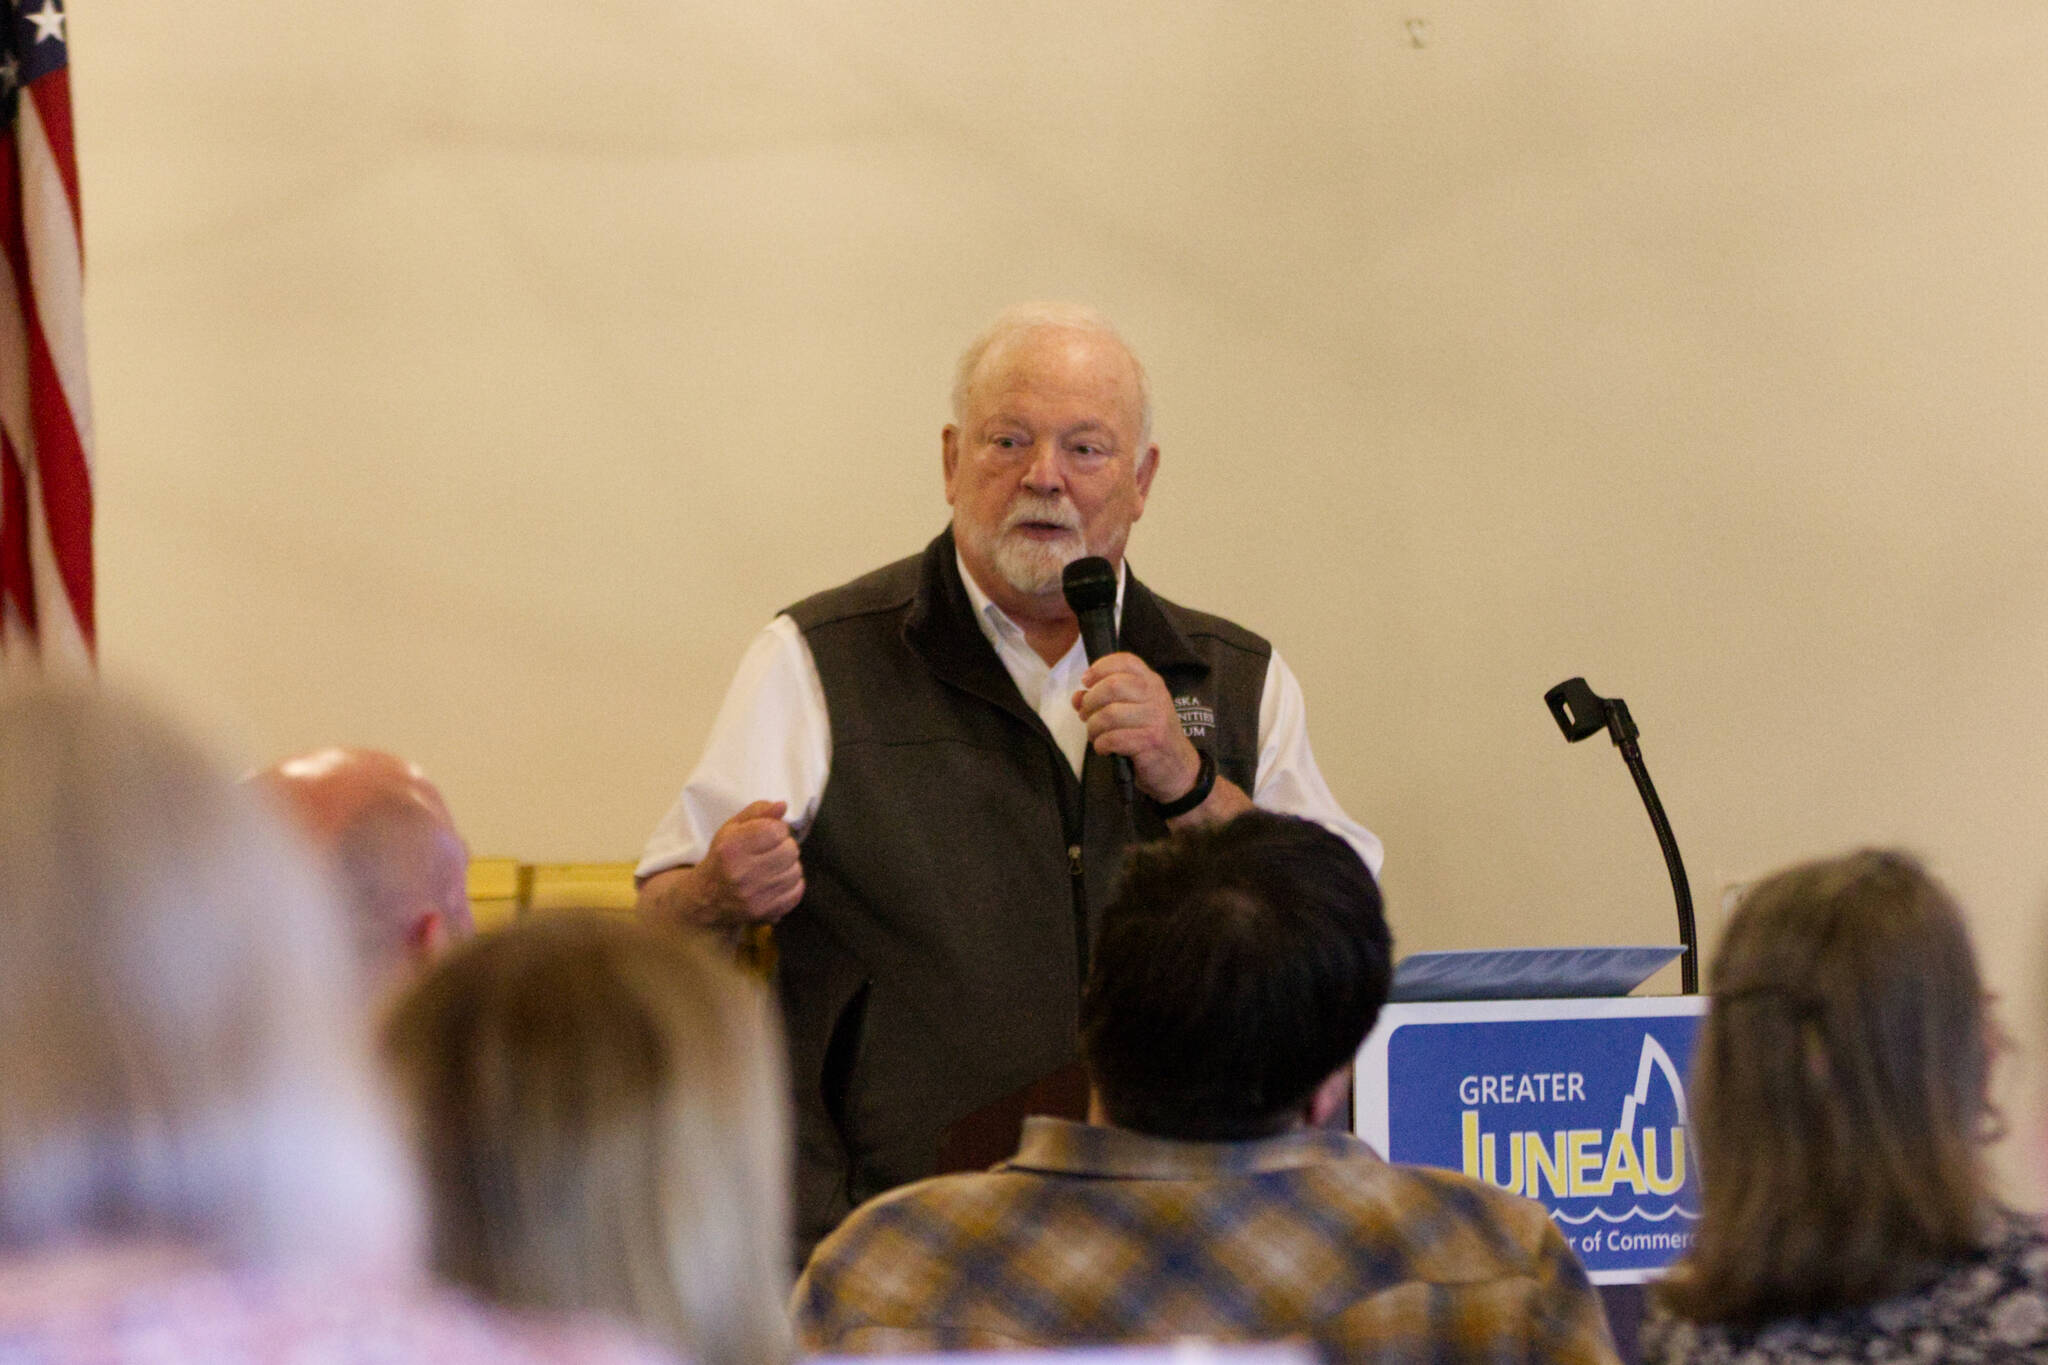 Former Juneau Mayor Bruce Botelho spoke about rank choice voting at the Chamber of Commerce’s weekly luncheon. (Clarise Larson / Juneau Empire)